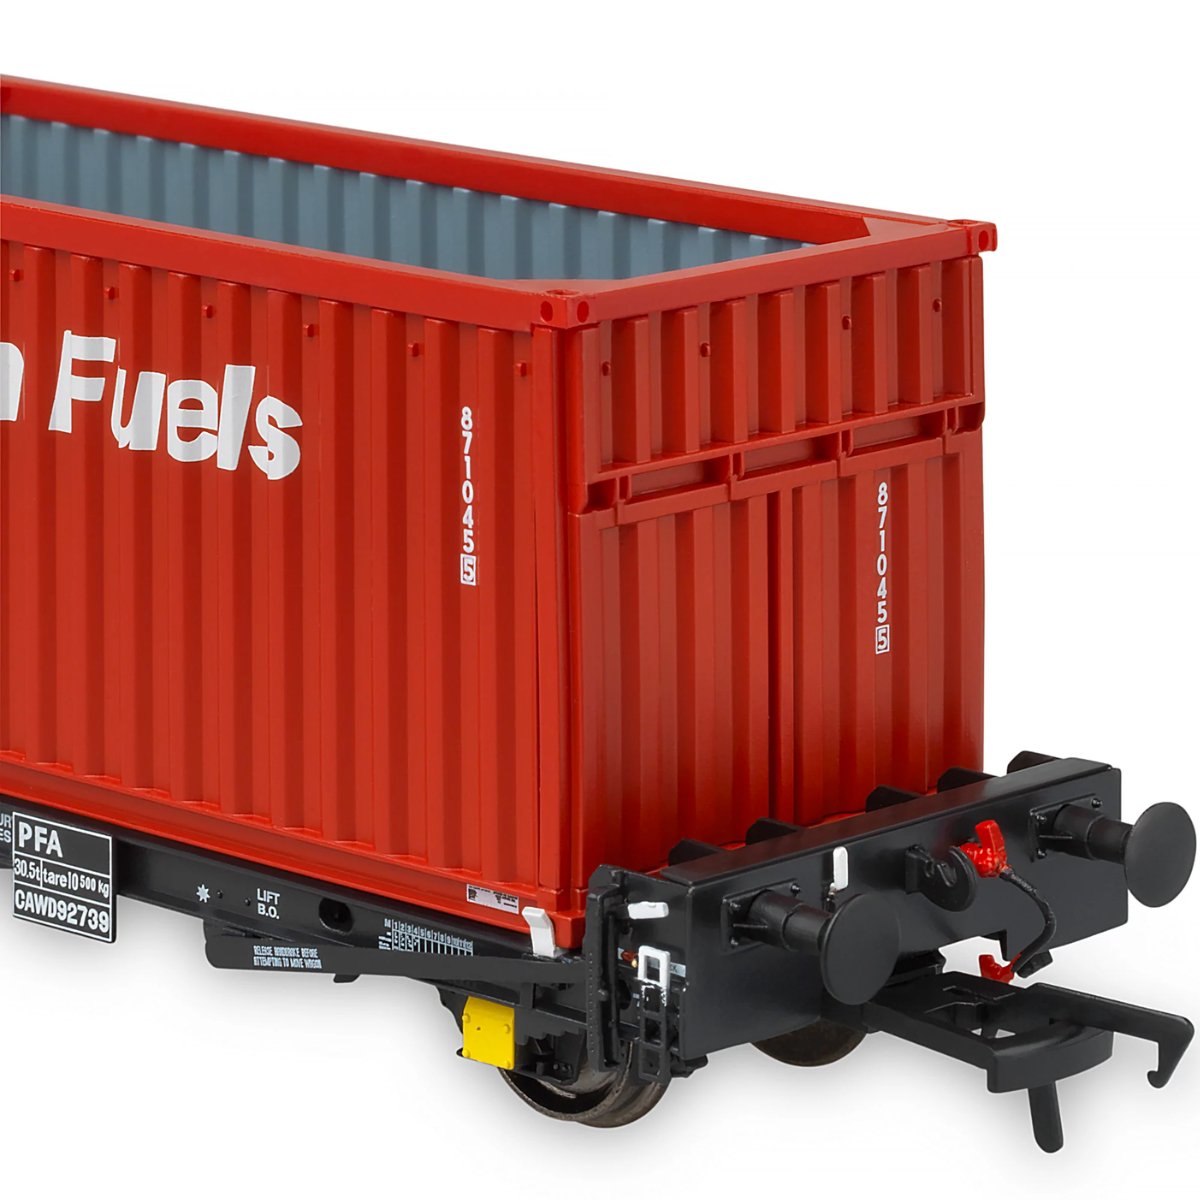 Accurascale PFA - British Fuels Coal Containers I - Phillips Hobbies